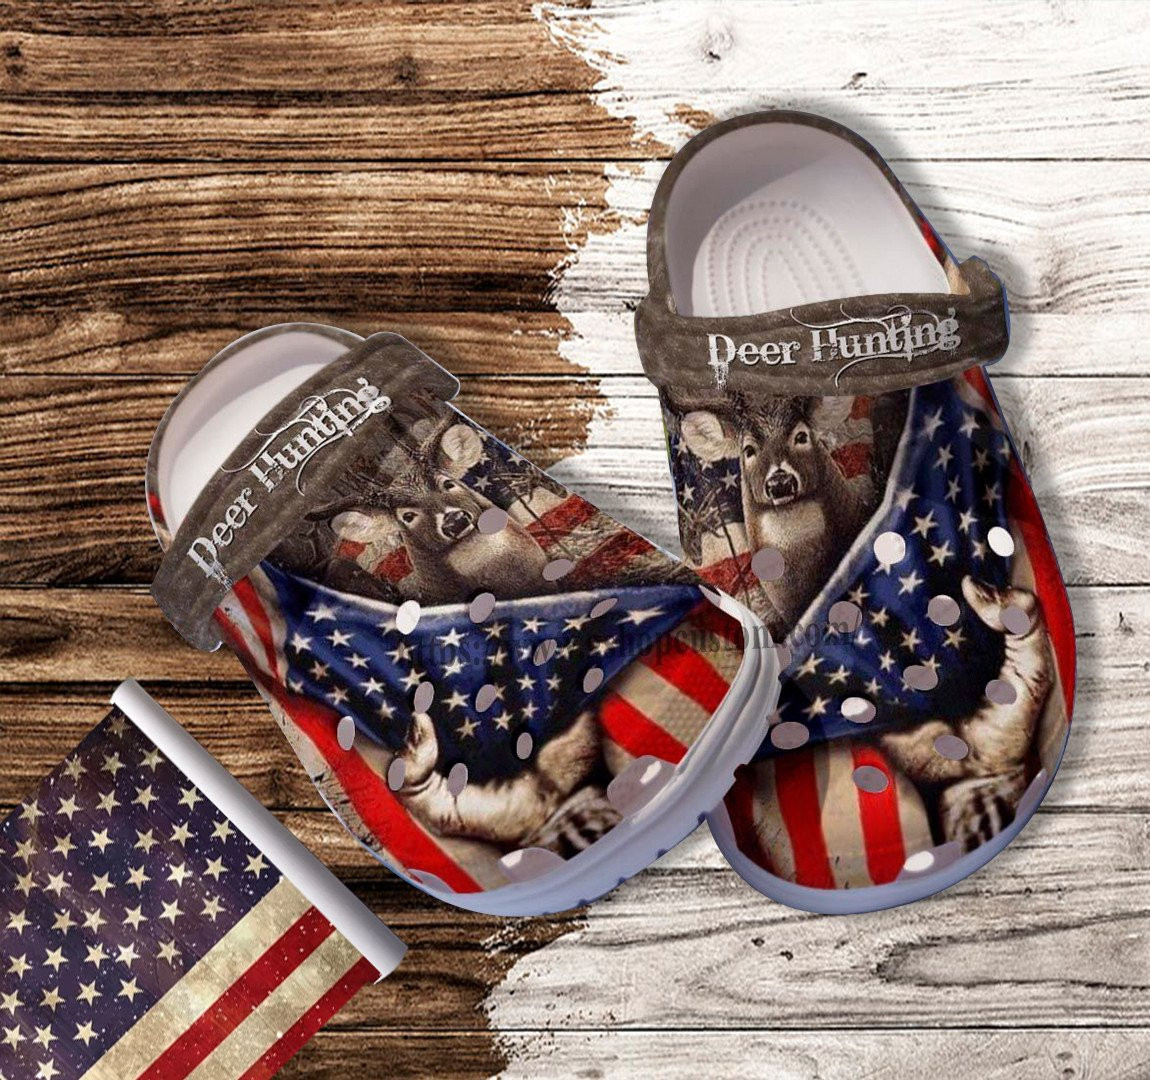 Deer Hunting Behind America Flag Croc Shoes Gift Men Father Day- Deer Hunter Camping Shoes Croc Clogs Gift Uncle